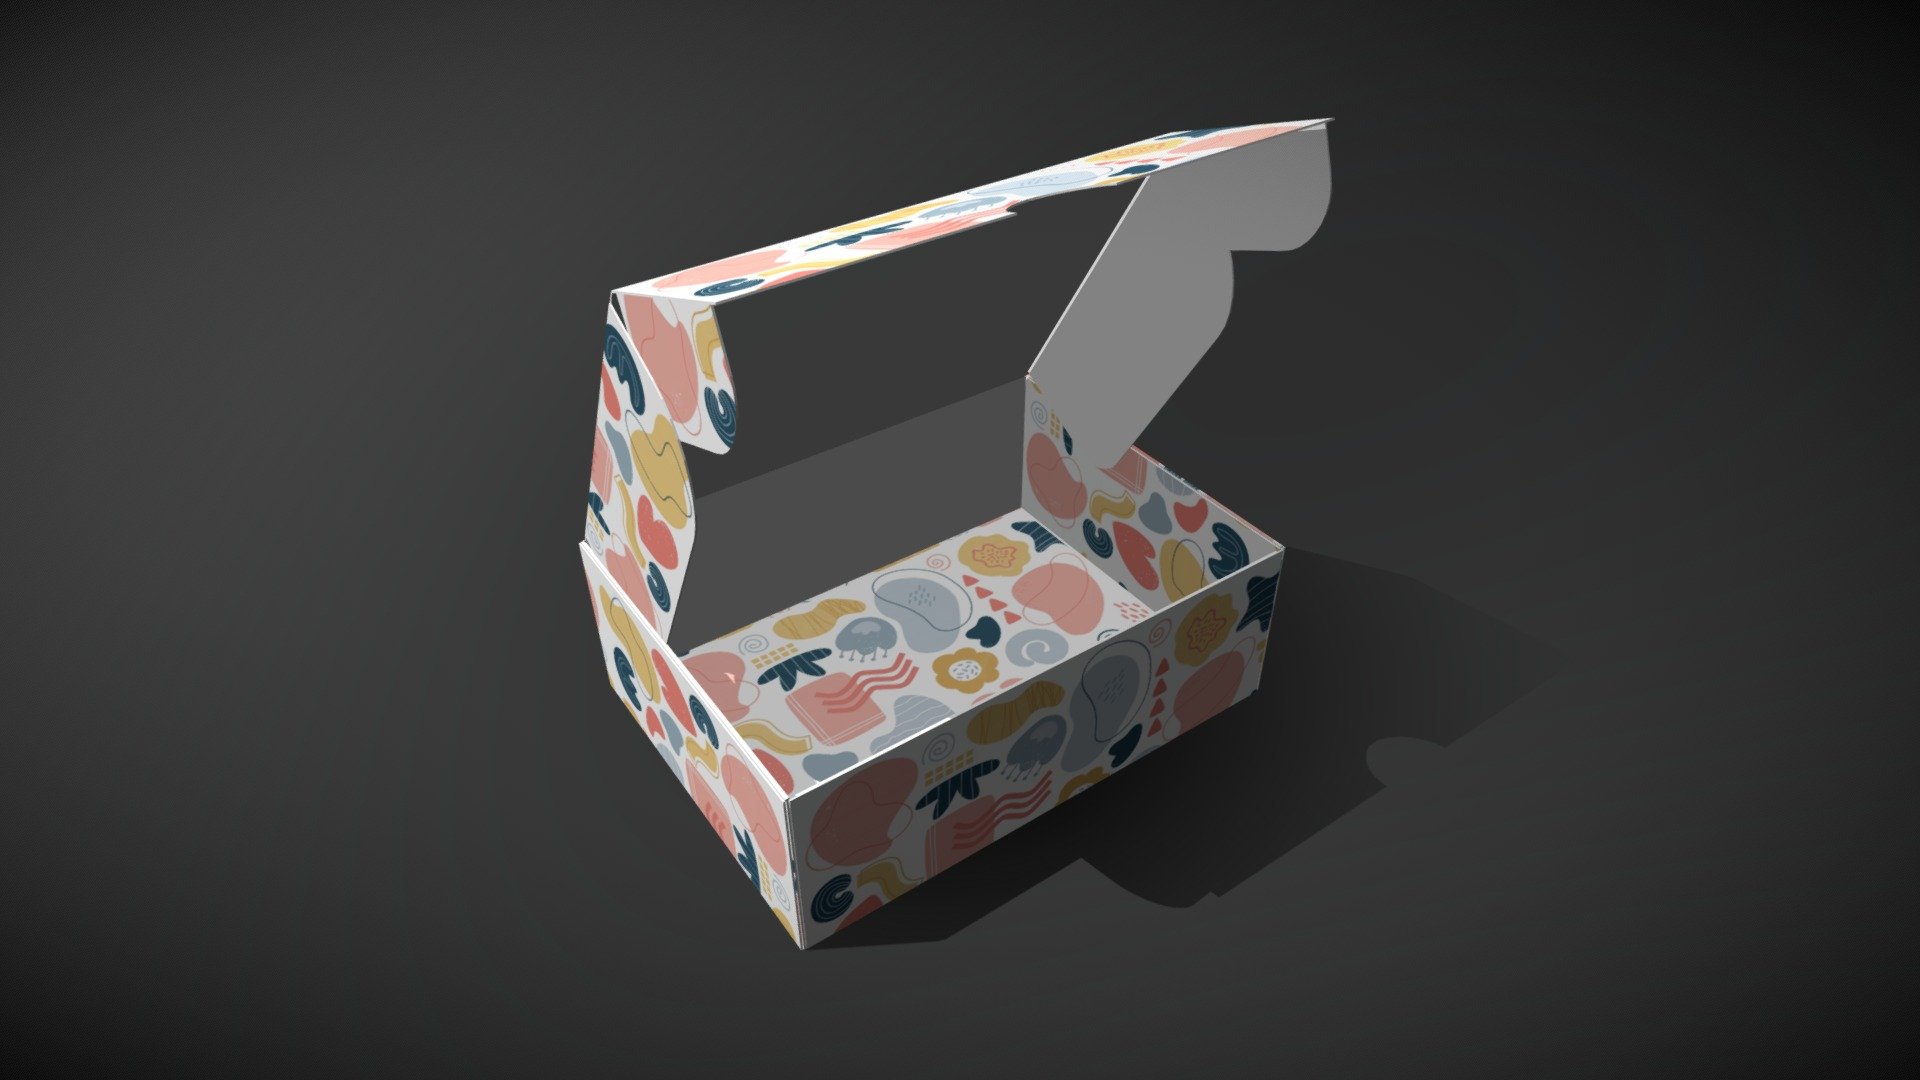 https://www.ludocards.com/quote/boxes - Casket cardboard box - 3D model by ludocards.com (@ludocards) 3d model